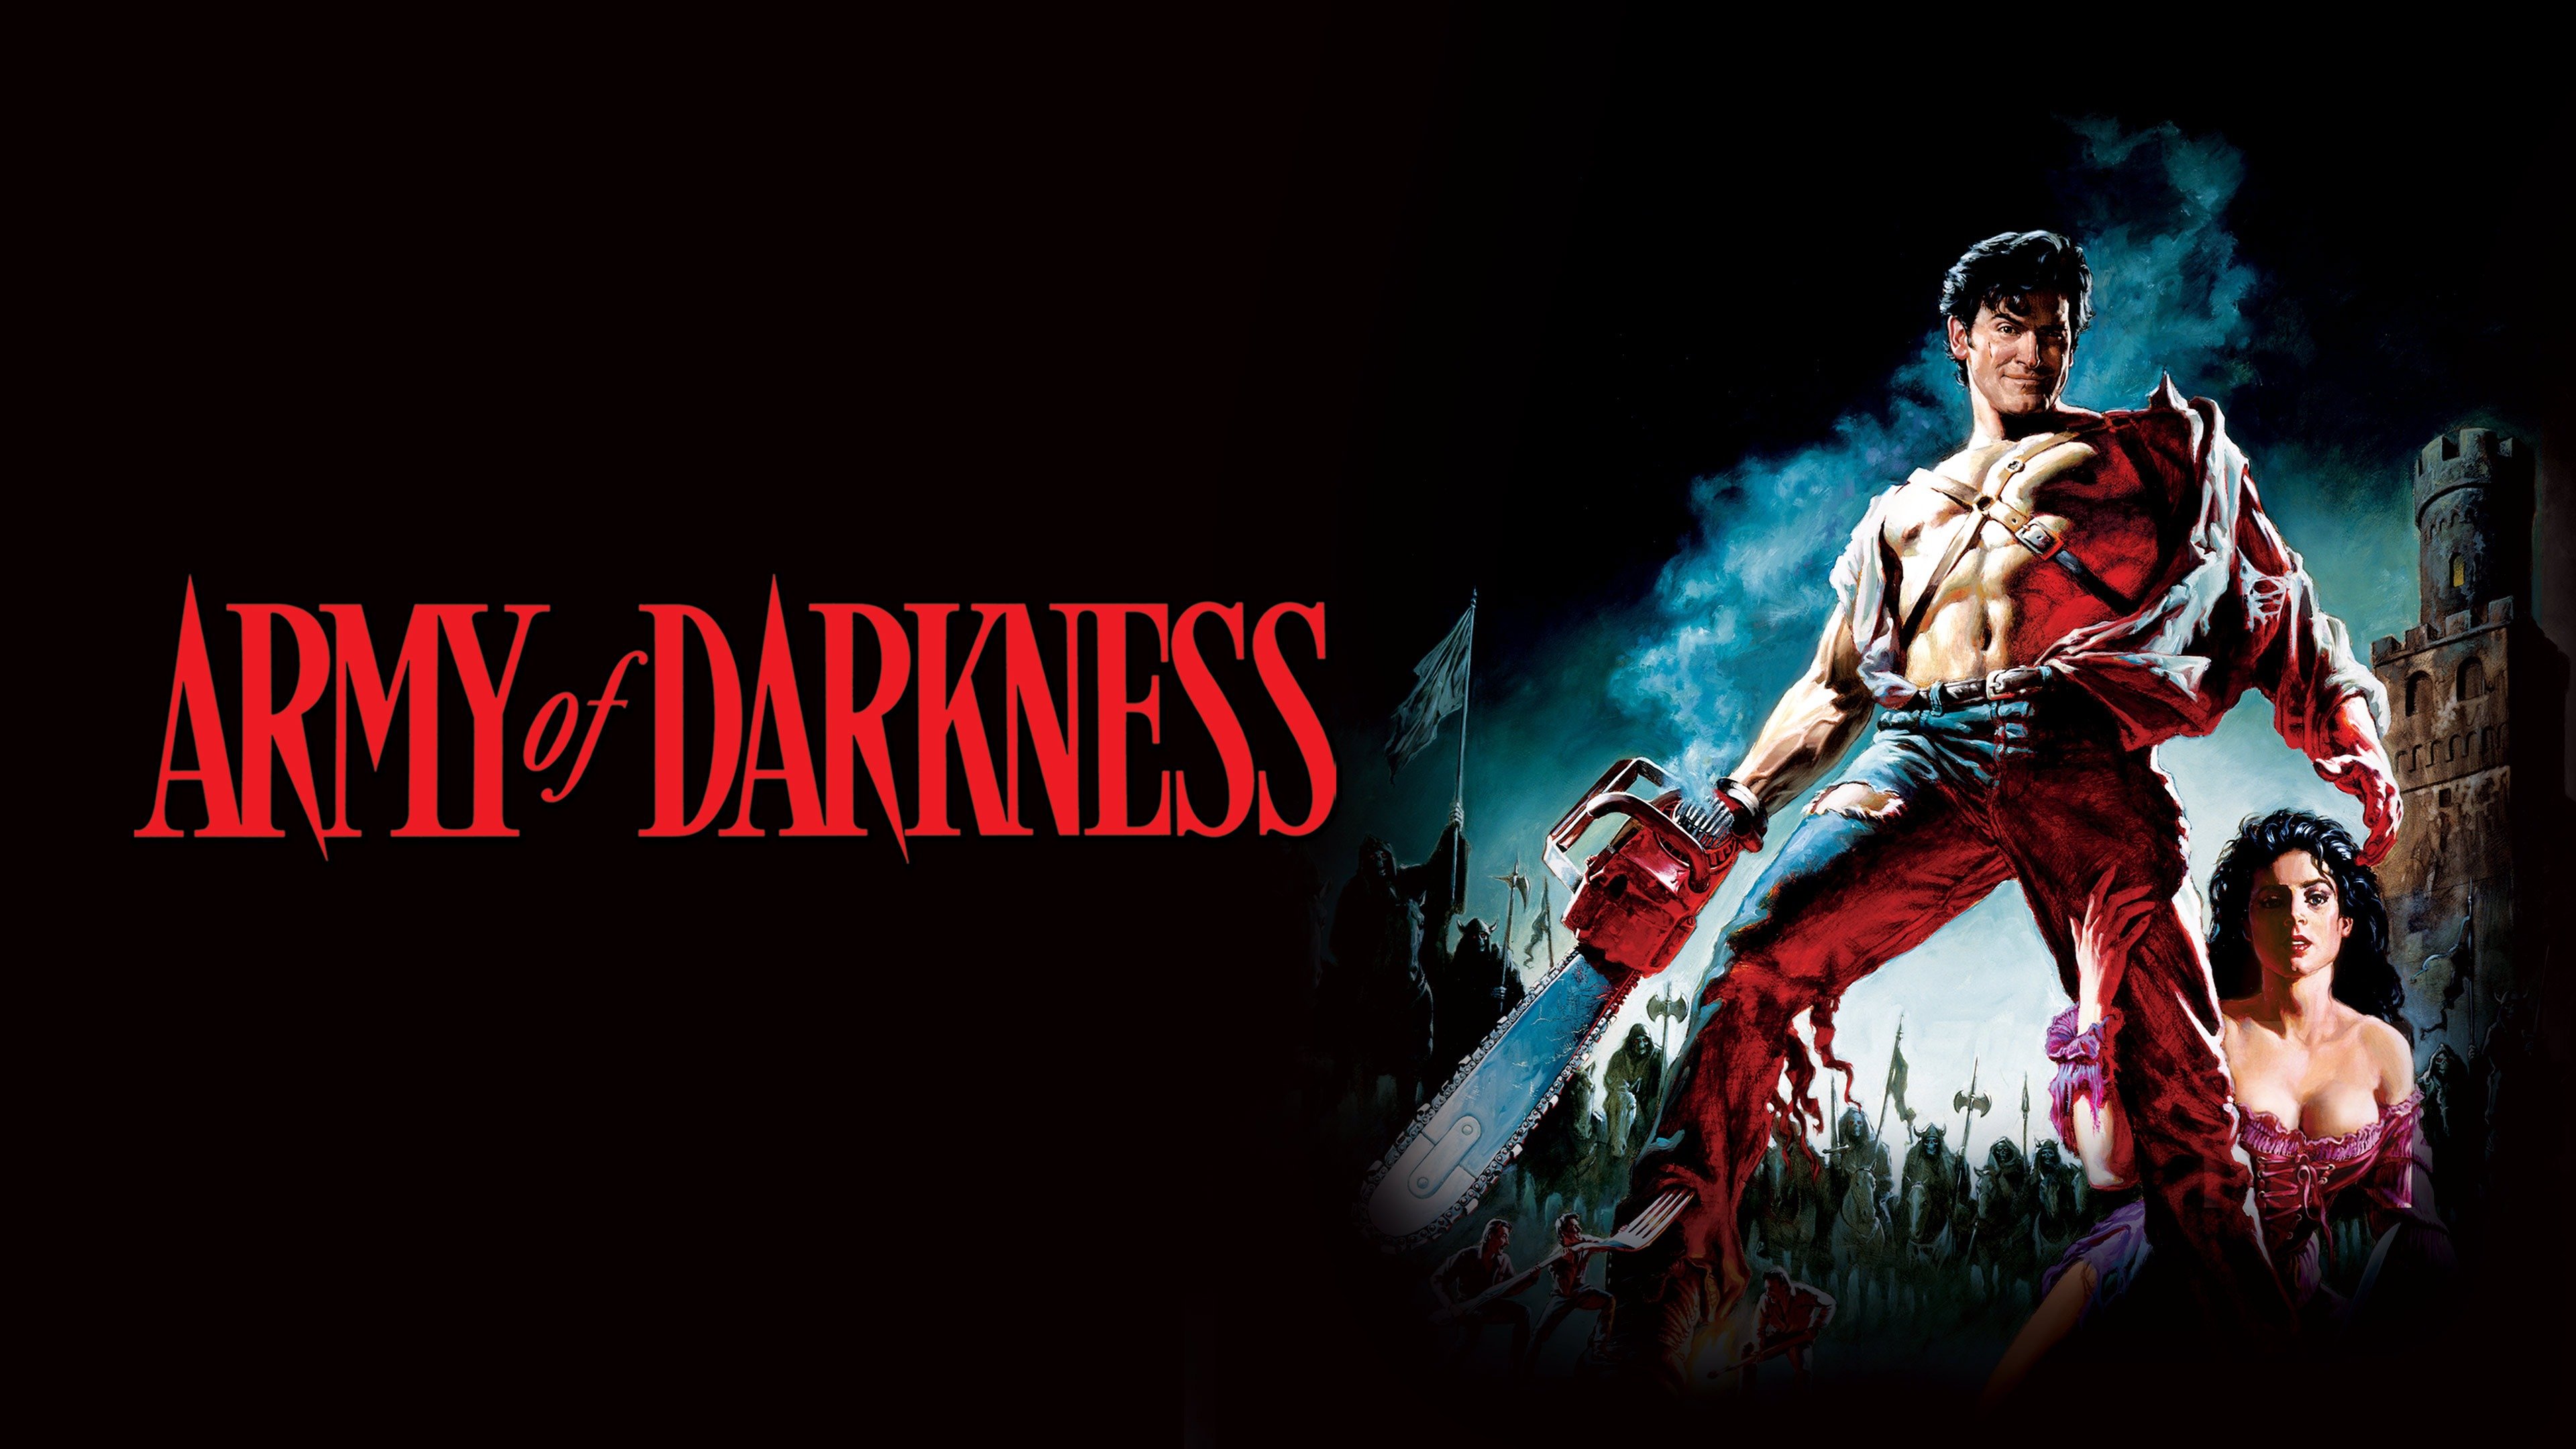 43-facts-about-the-movie-army-of-darkness